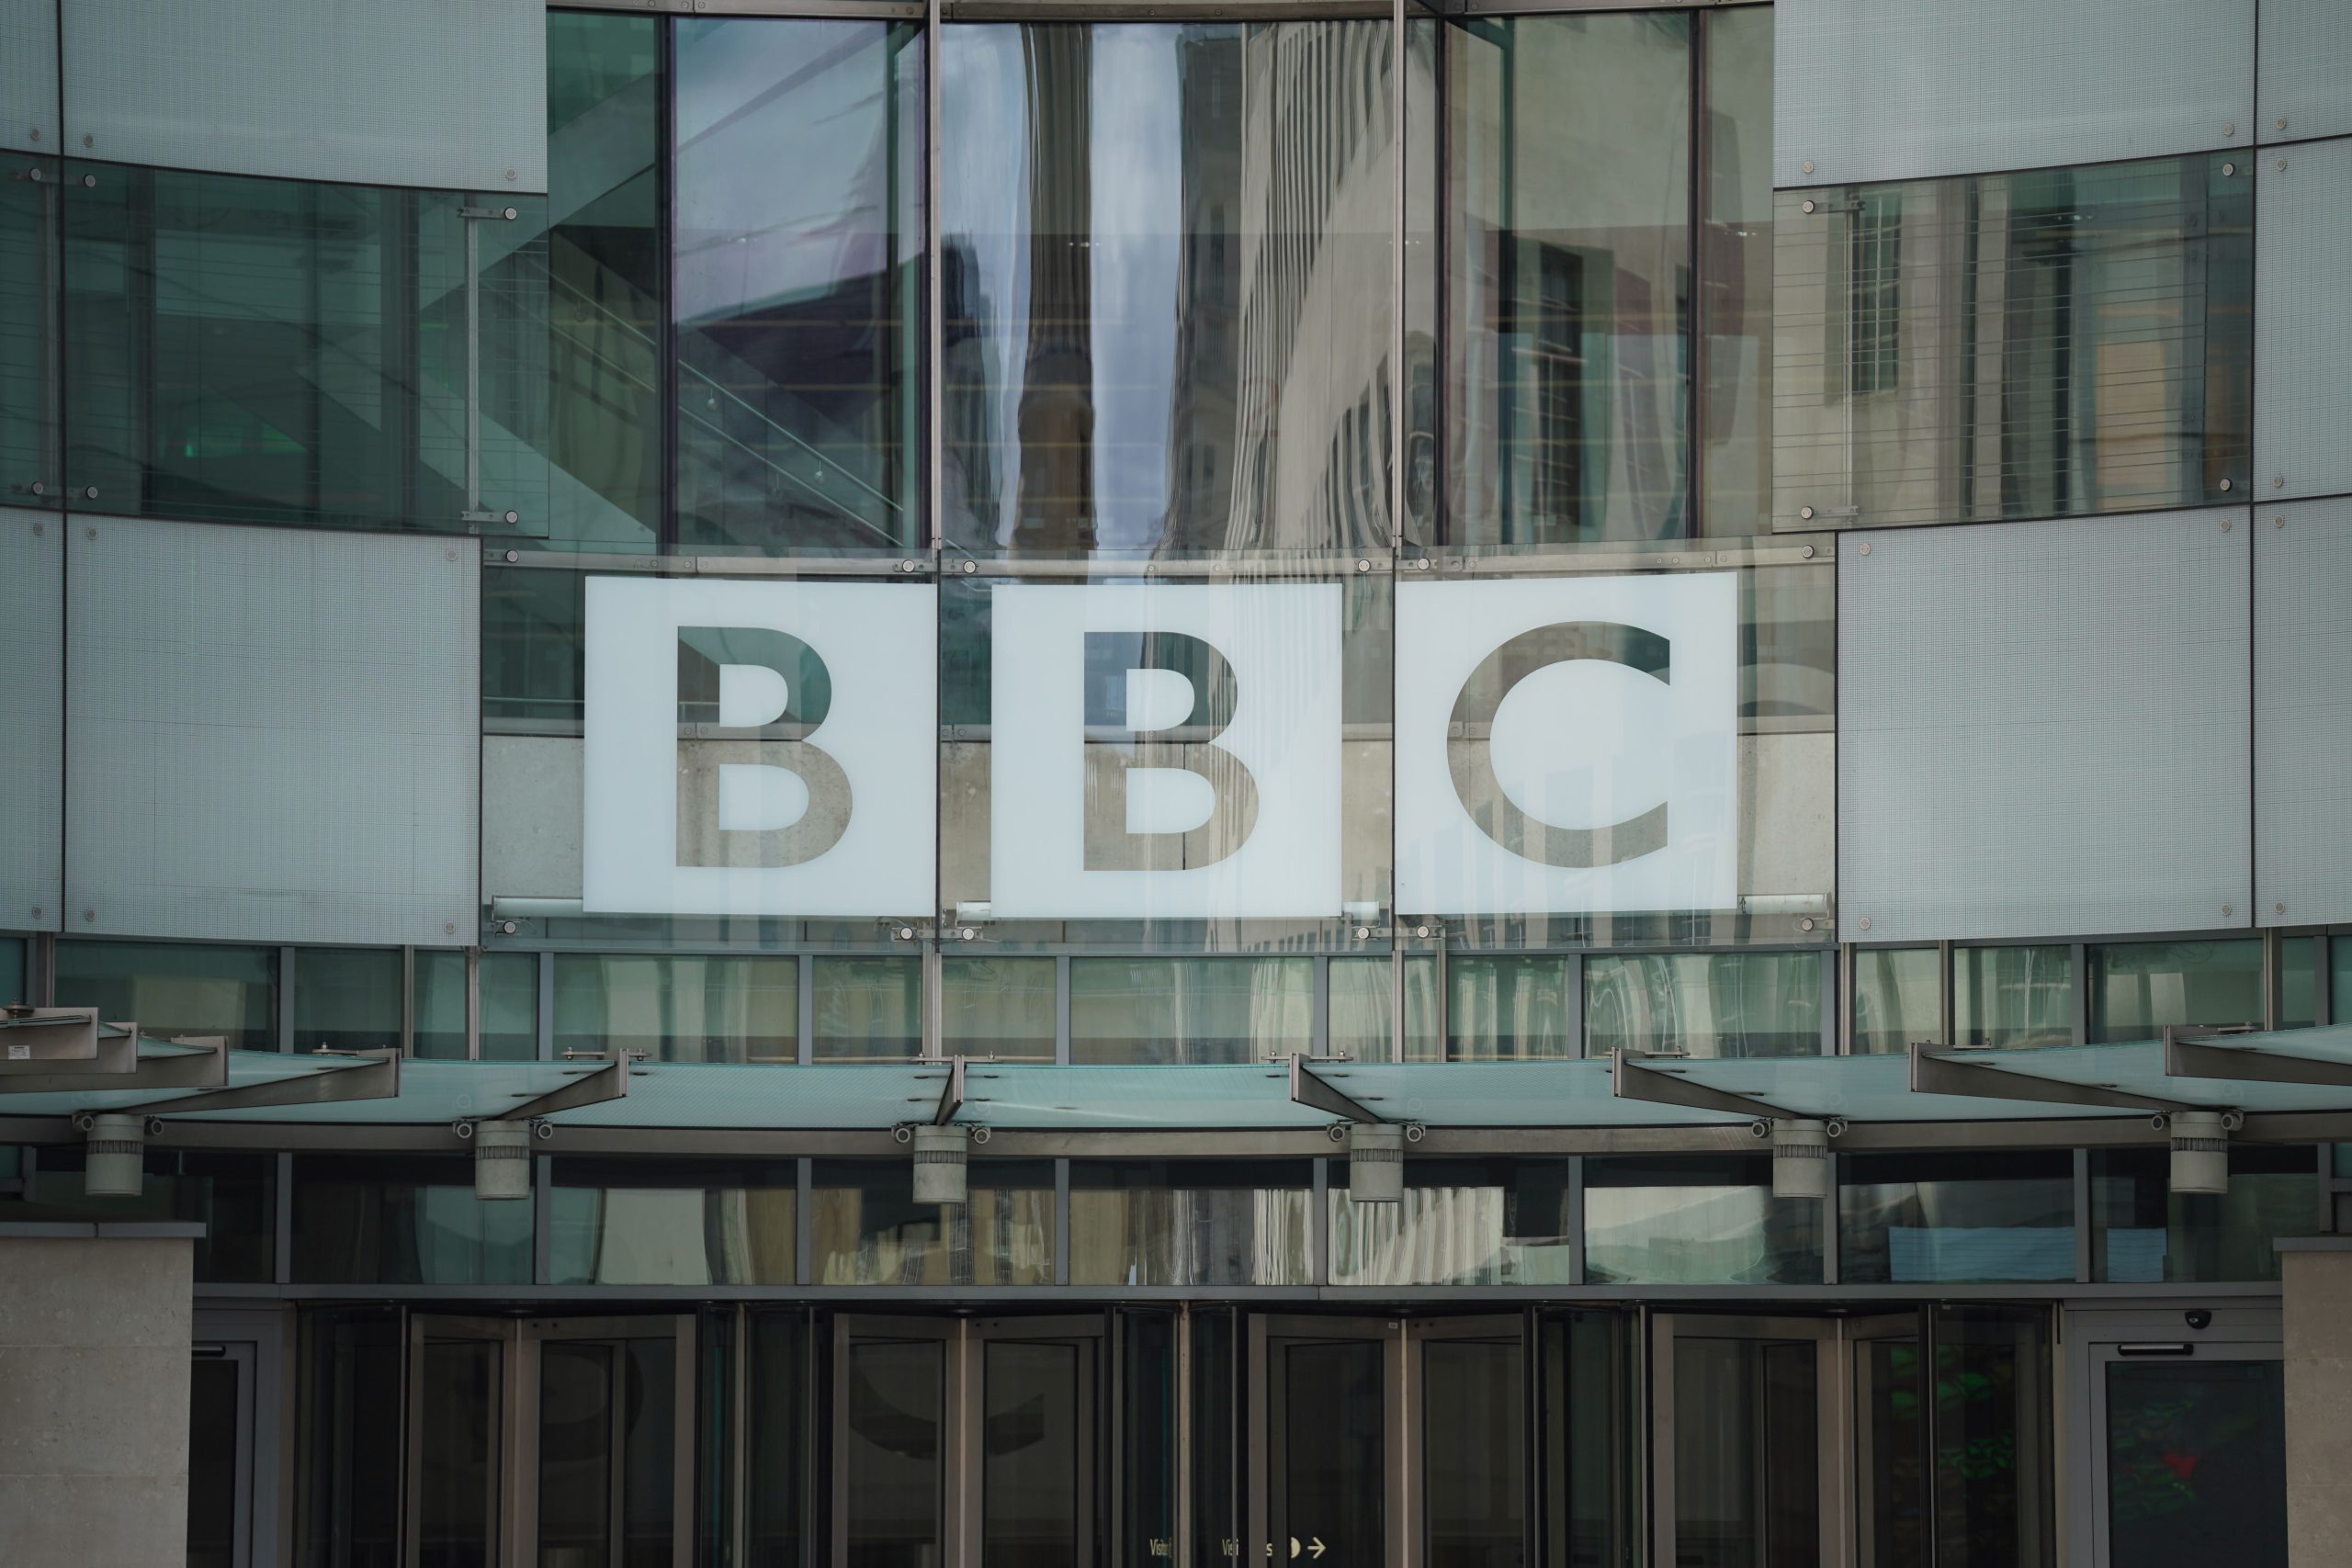 why bbc avoids labeling hamas as terrorists